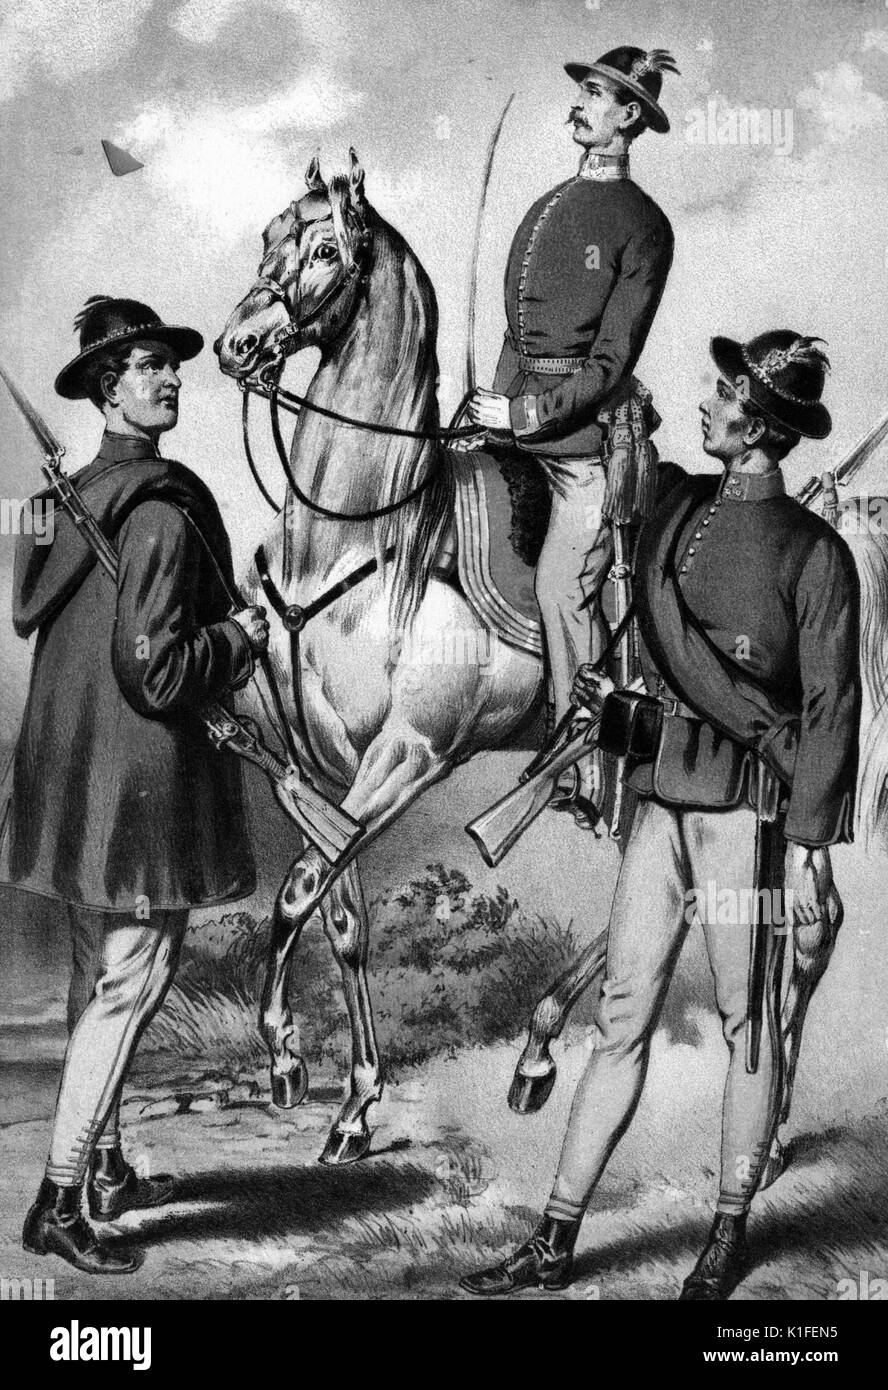 Color lithograph depicting three German soldiers, one on a horse, titled West Galisch Frei Infanterie Corps, 1859. From the New York Public Library. Stock Photo